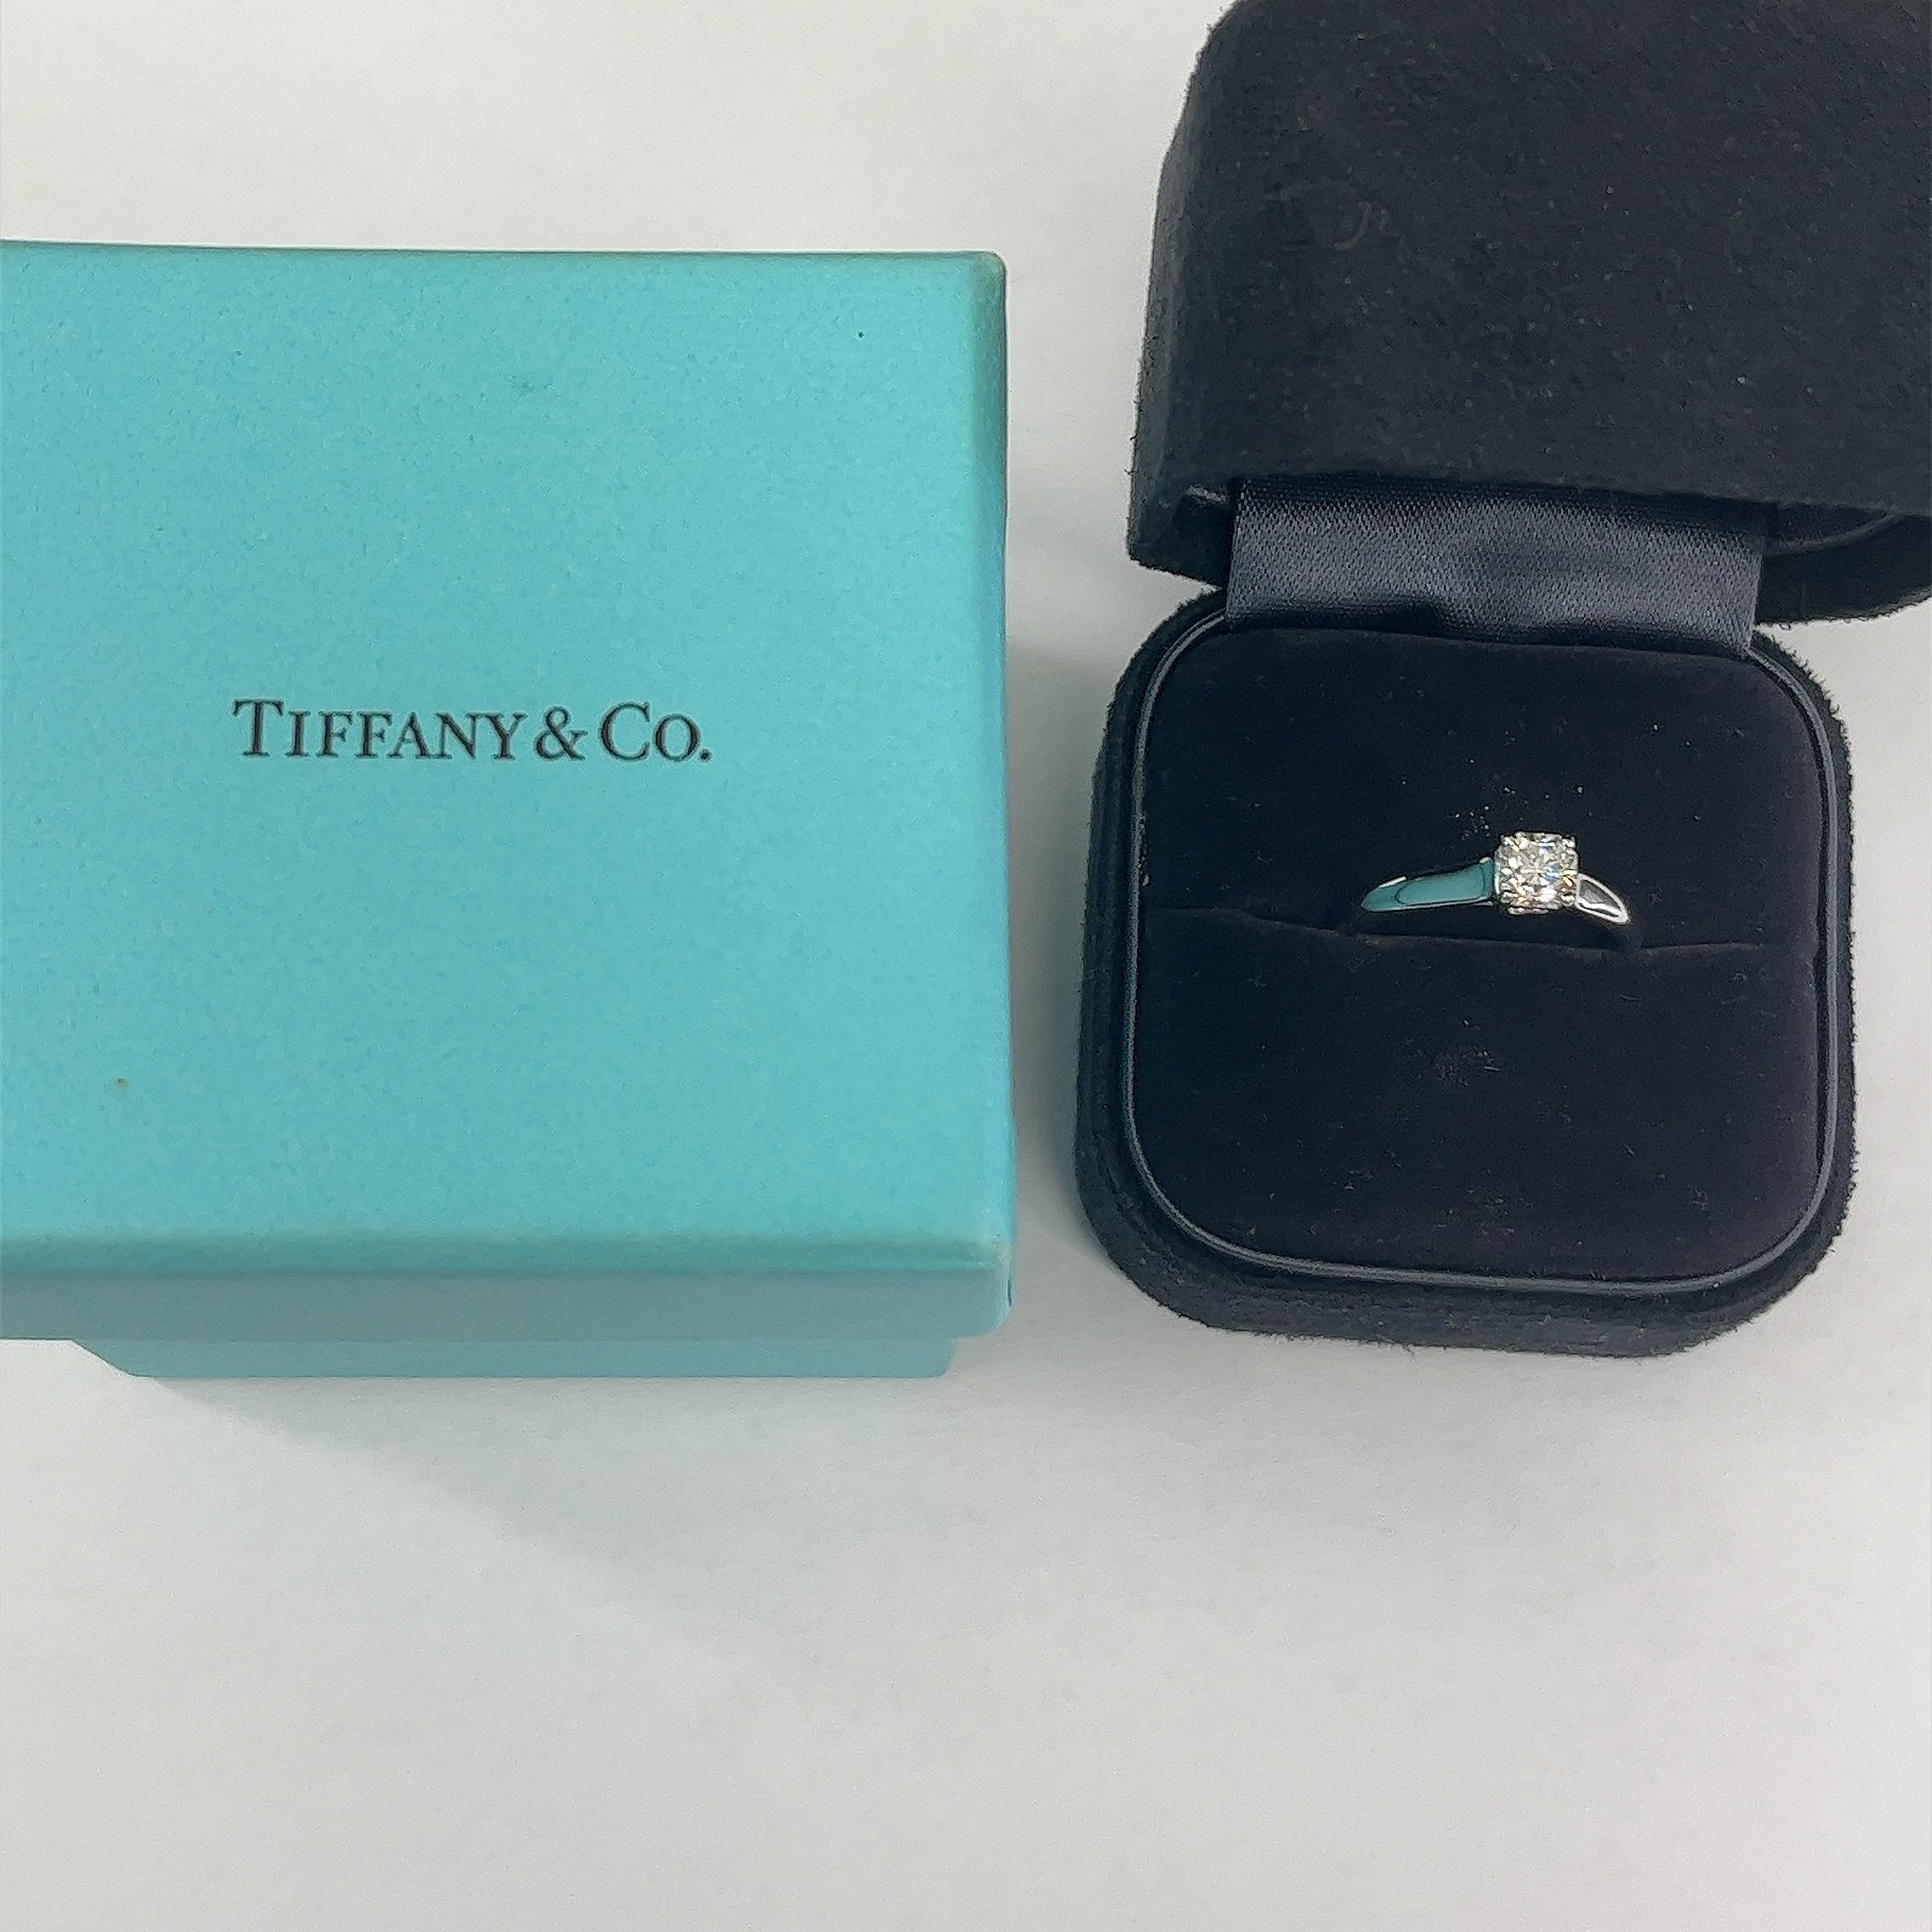 Tiffany & Co. Platinum Solitaire Engagement Ring, Set with 0.52ct E/VVS2 Diamond For Sale 3